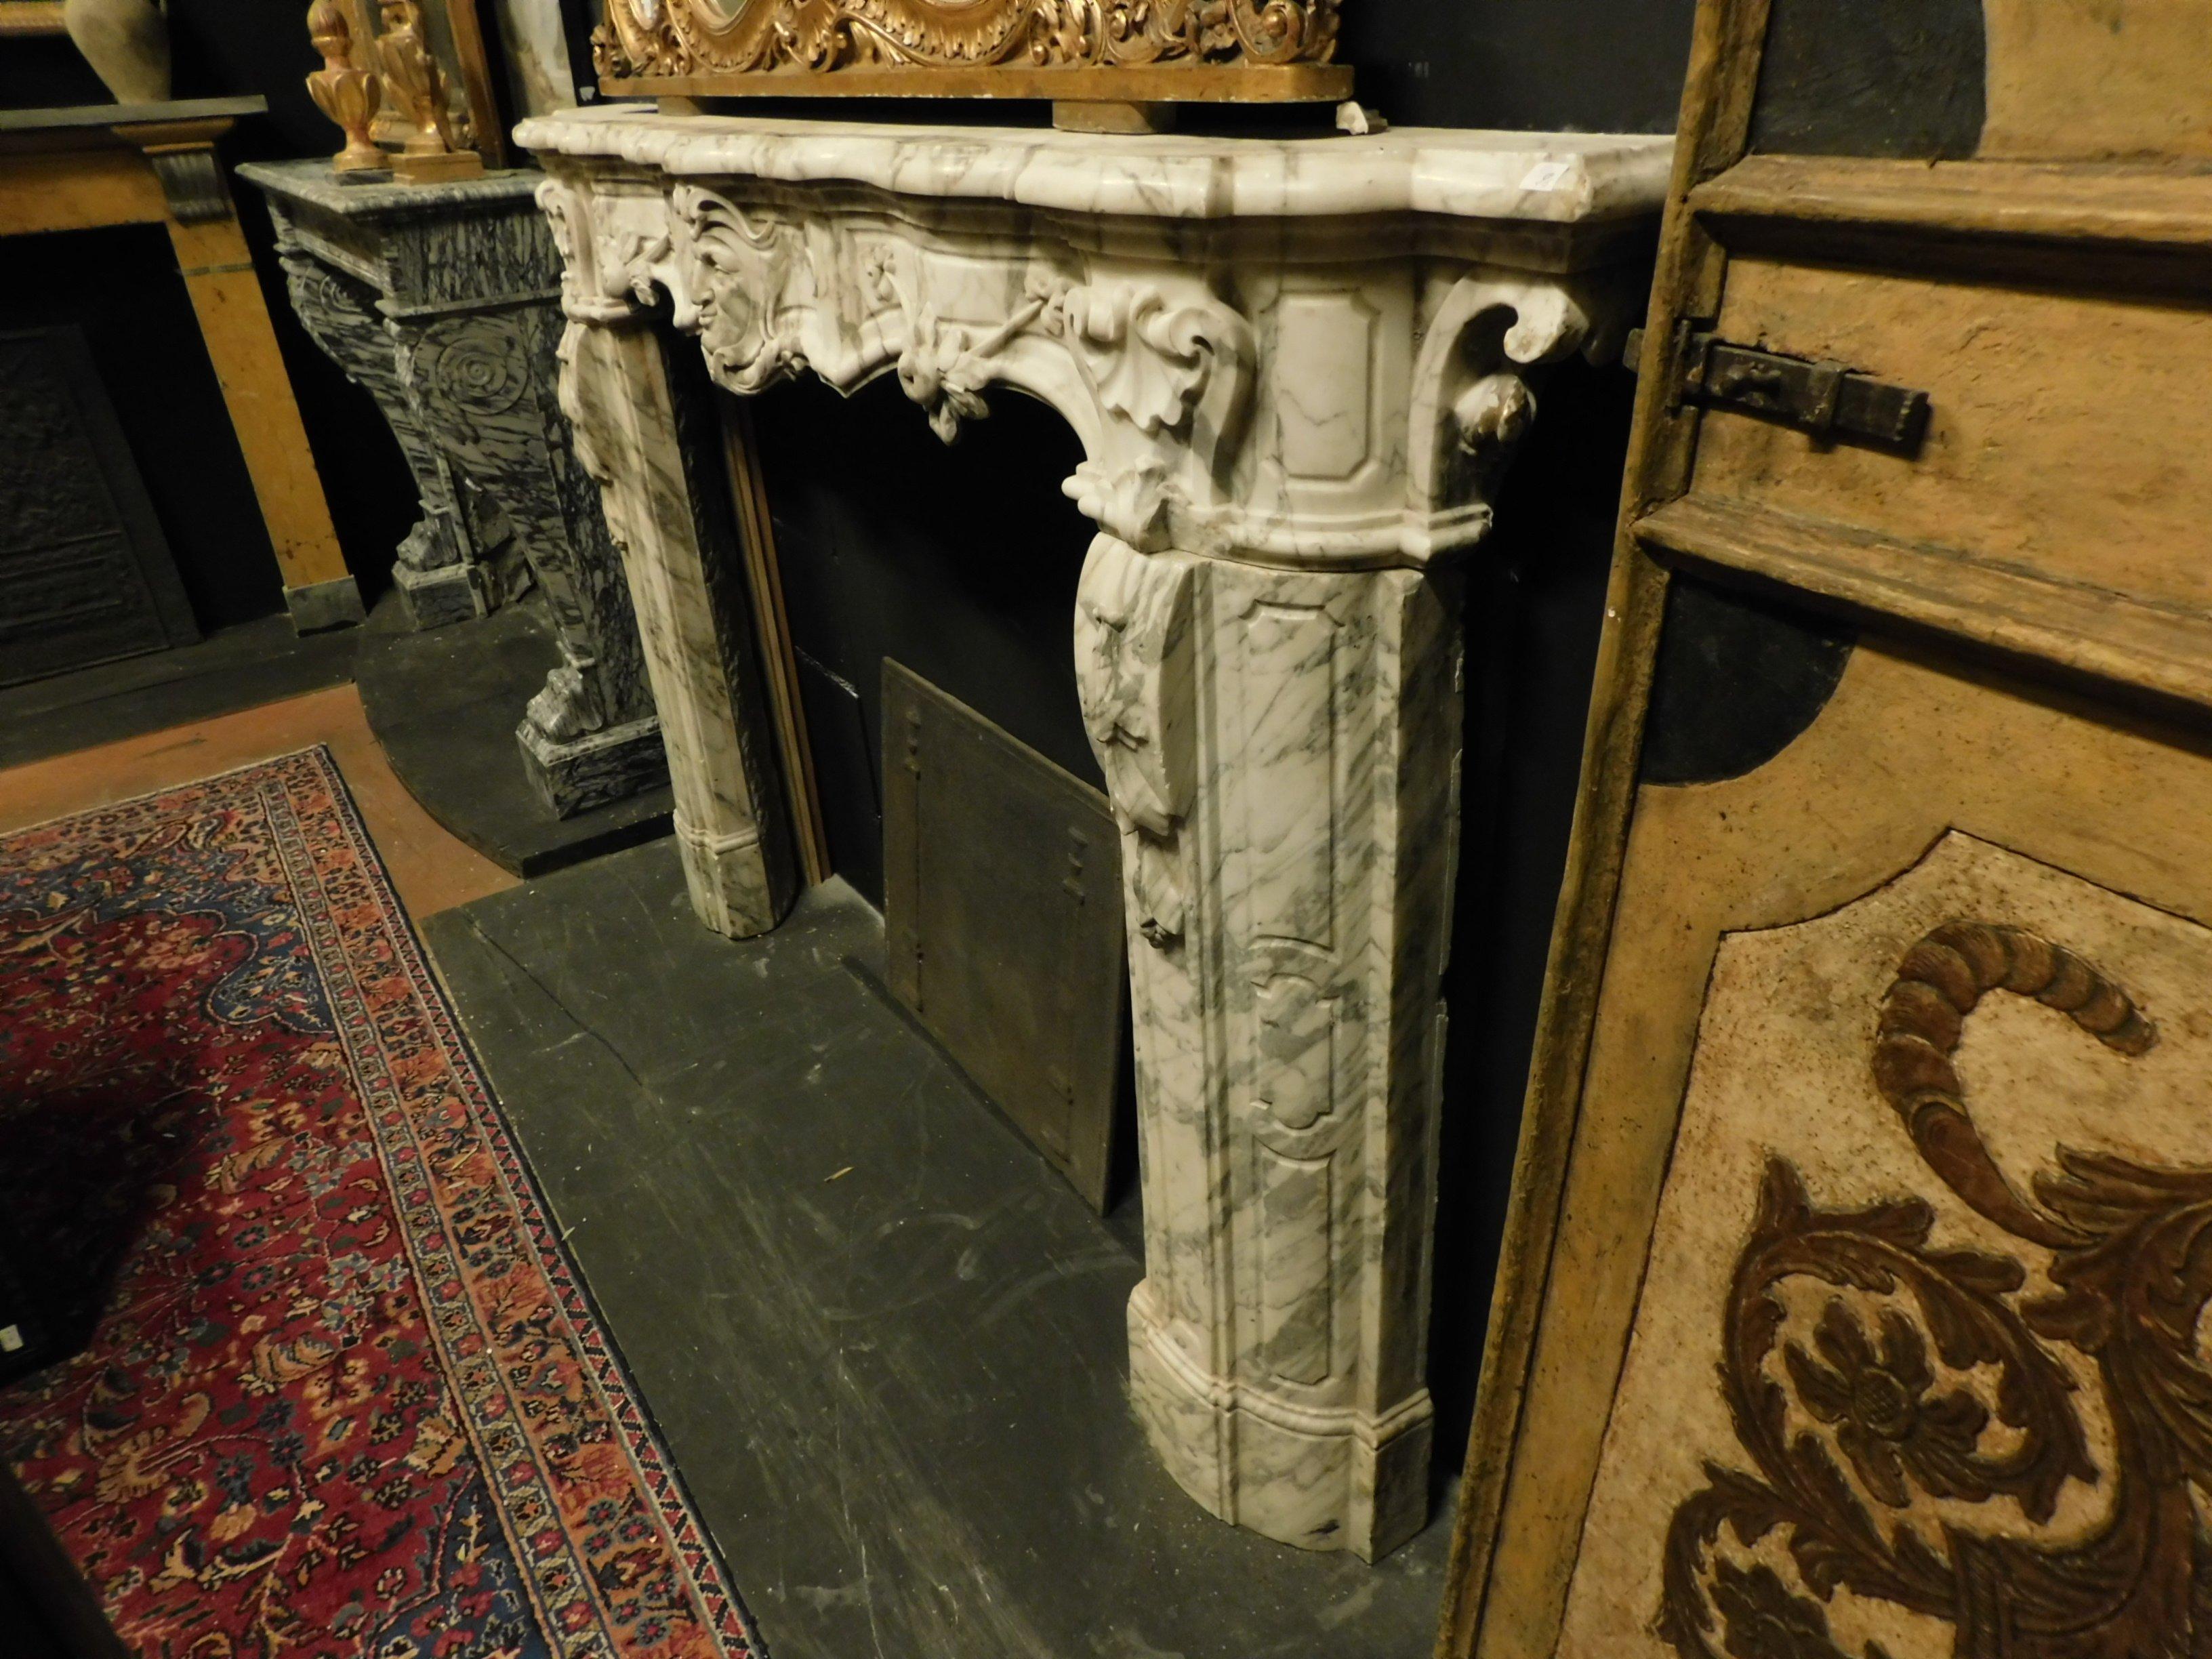 Italian Antique White Marble Fireplace with Mask and Friezes, 18th Century, Italy For Sale